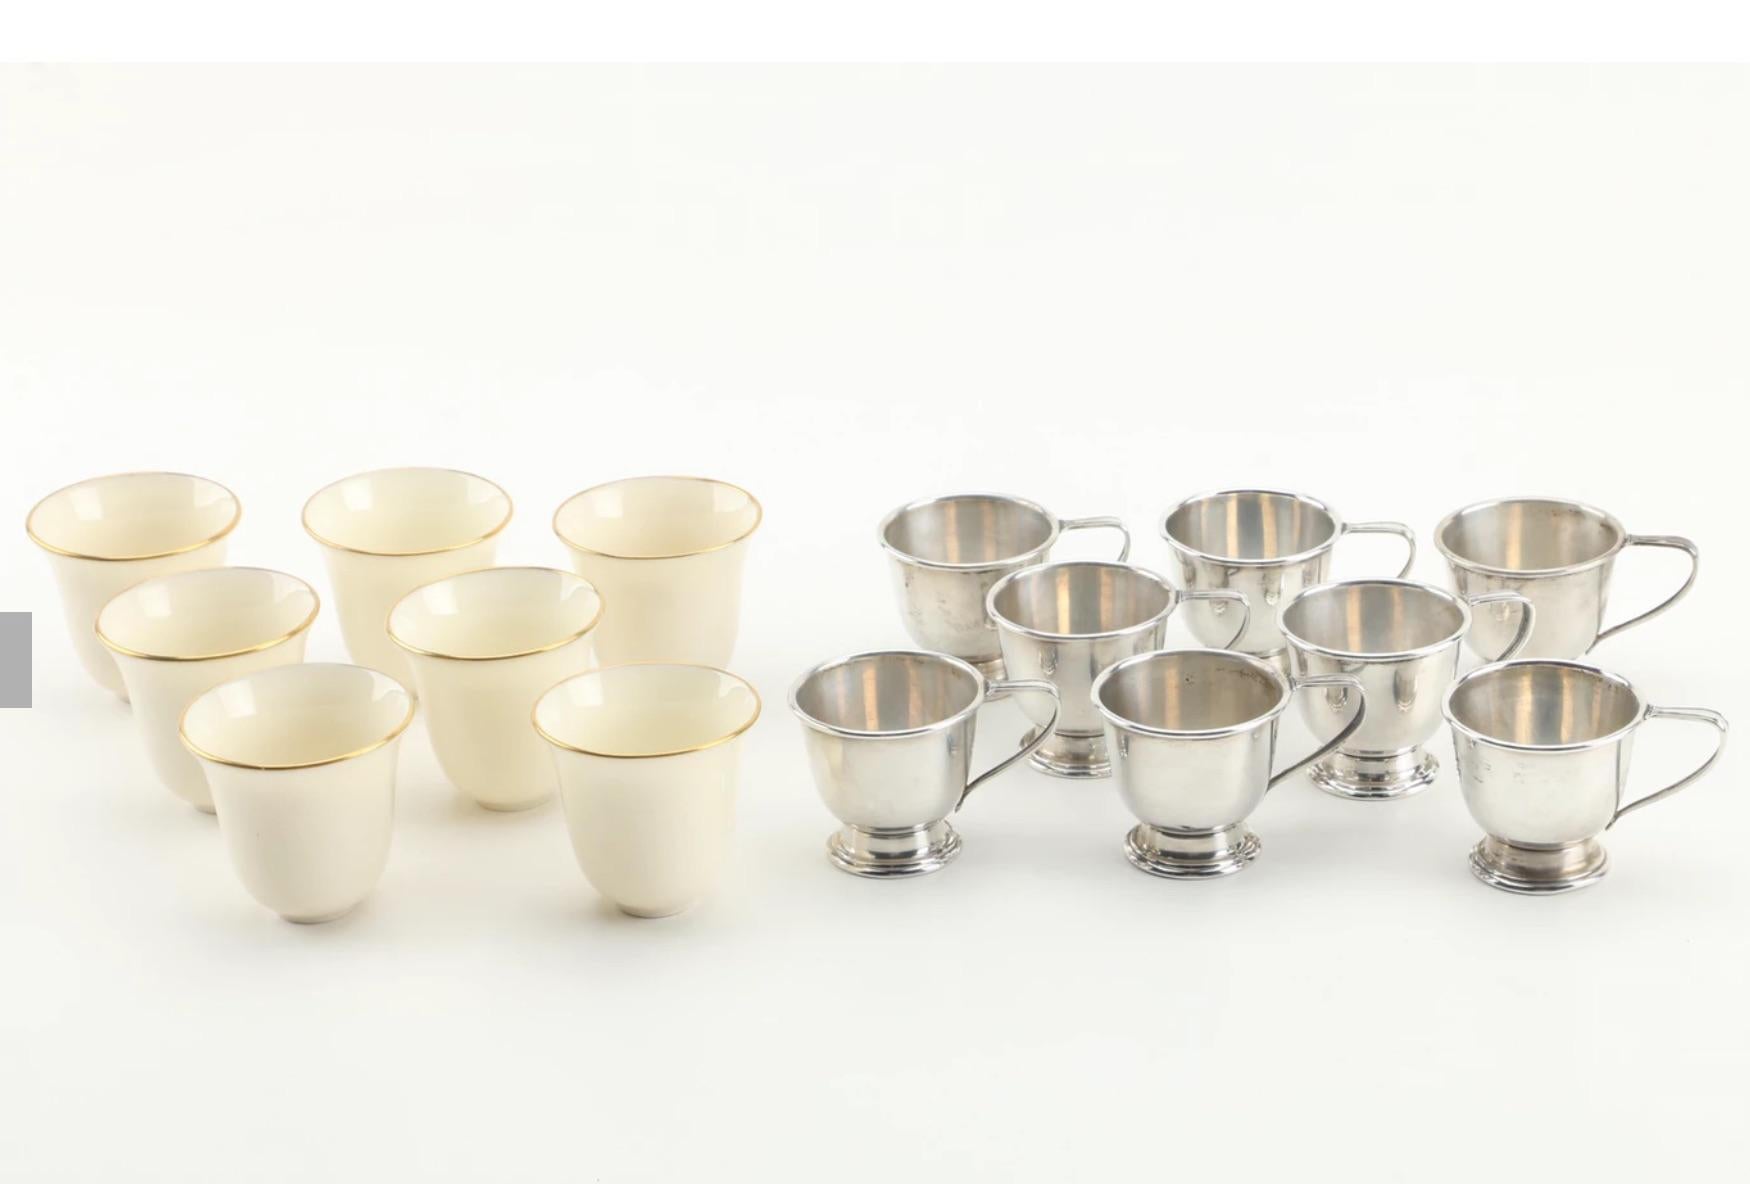 Lovely set of 24 pcs.- International Silver Co. 8 Sterling demitasse cups and 8 saucers with 8 Lenox porcelain inserts.
A vintage demitasse cup and saucer set by the International Silver Company and Lenox. The collection features eight round